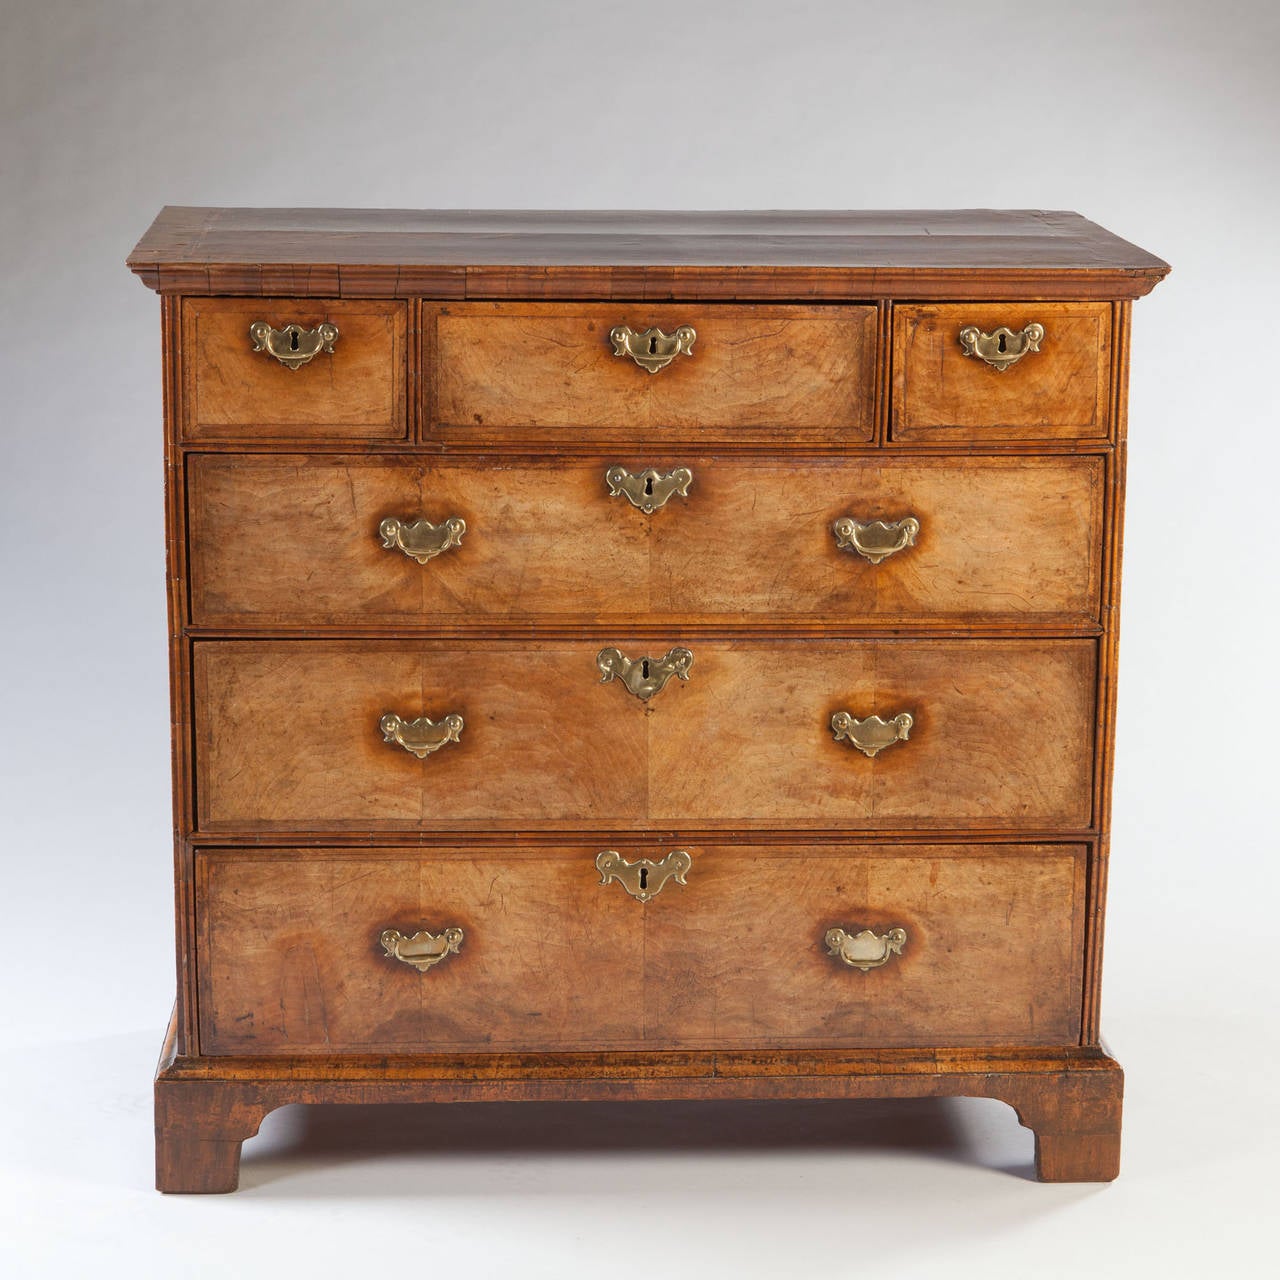 A fine early eighteenth century walnut chest of drawers of good colour with graduated drawers, brass handles, all supported on bracket feet.